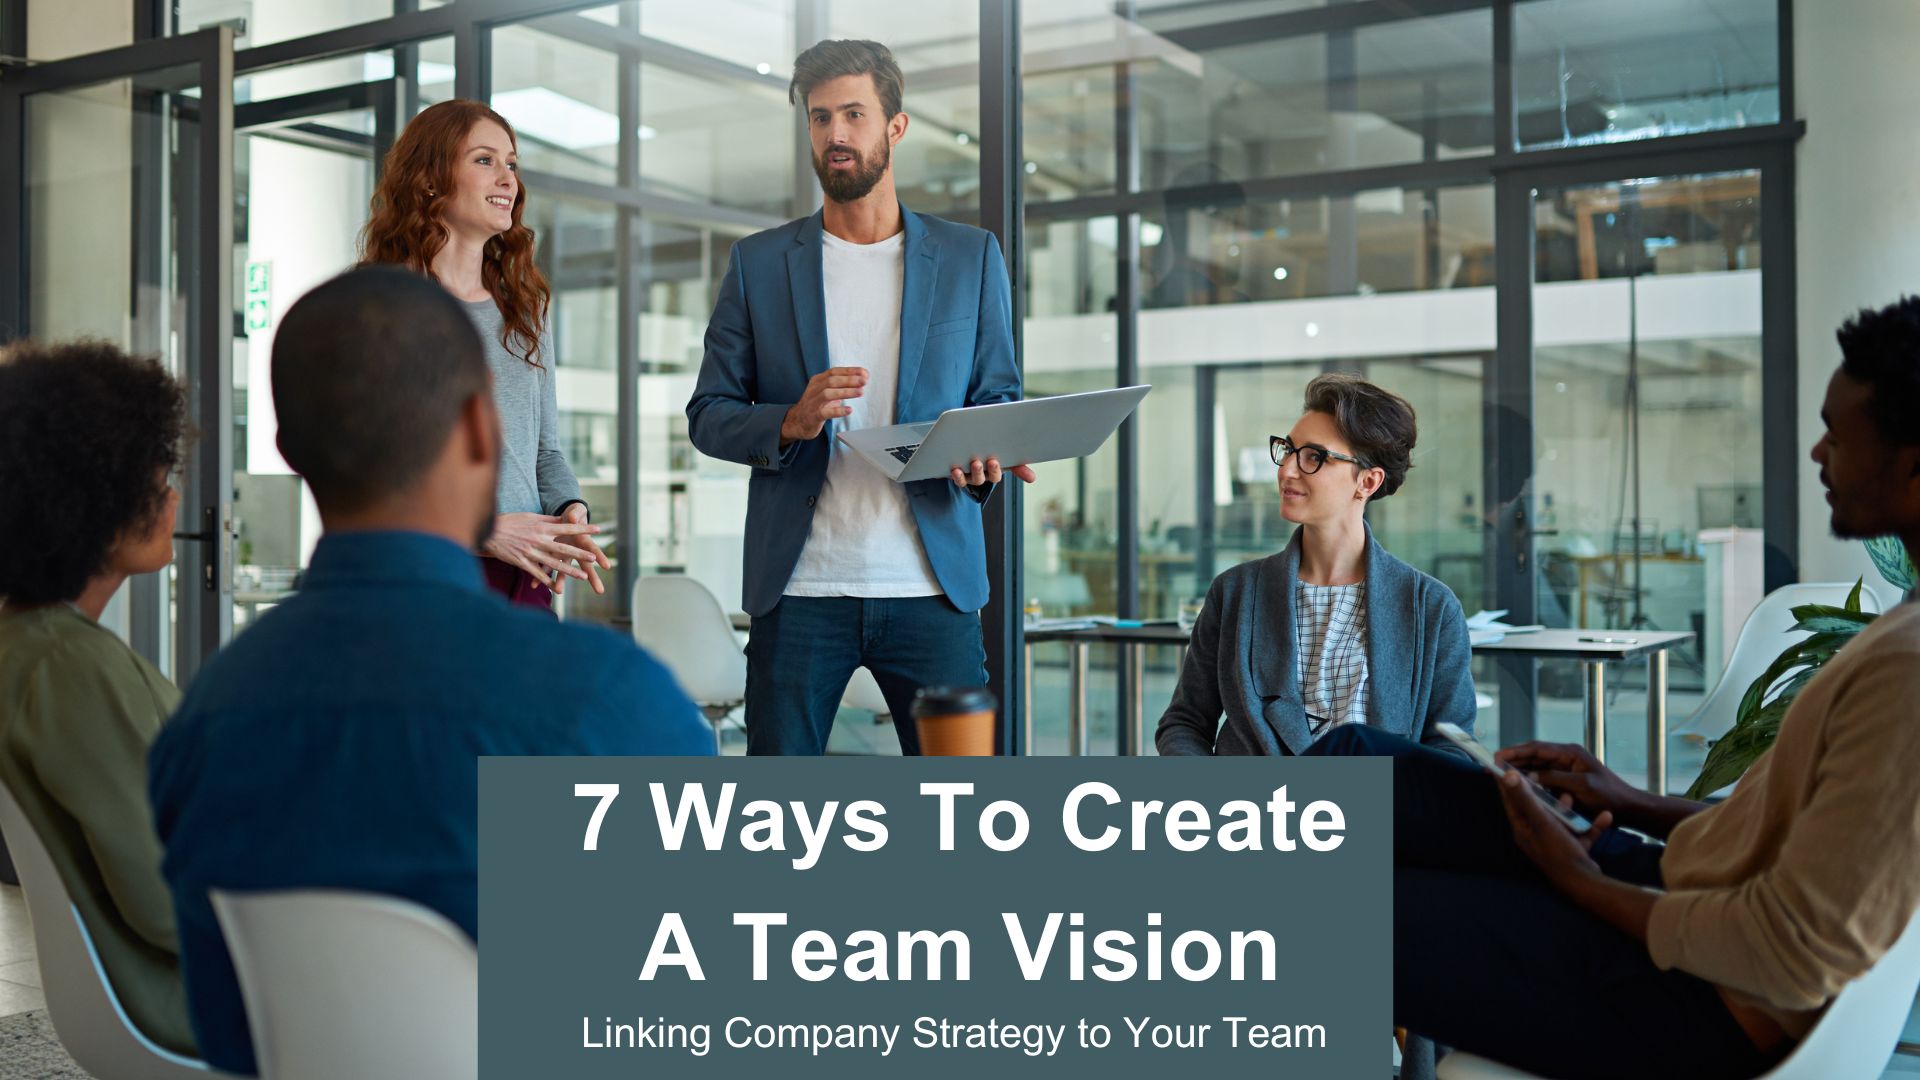 7 Ways to Create A Team Vision - Linking Company Strategy To your Team